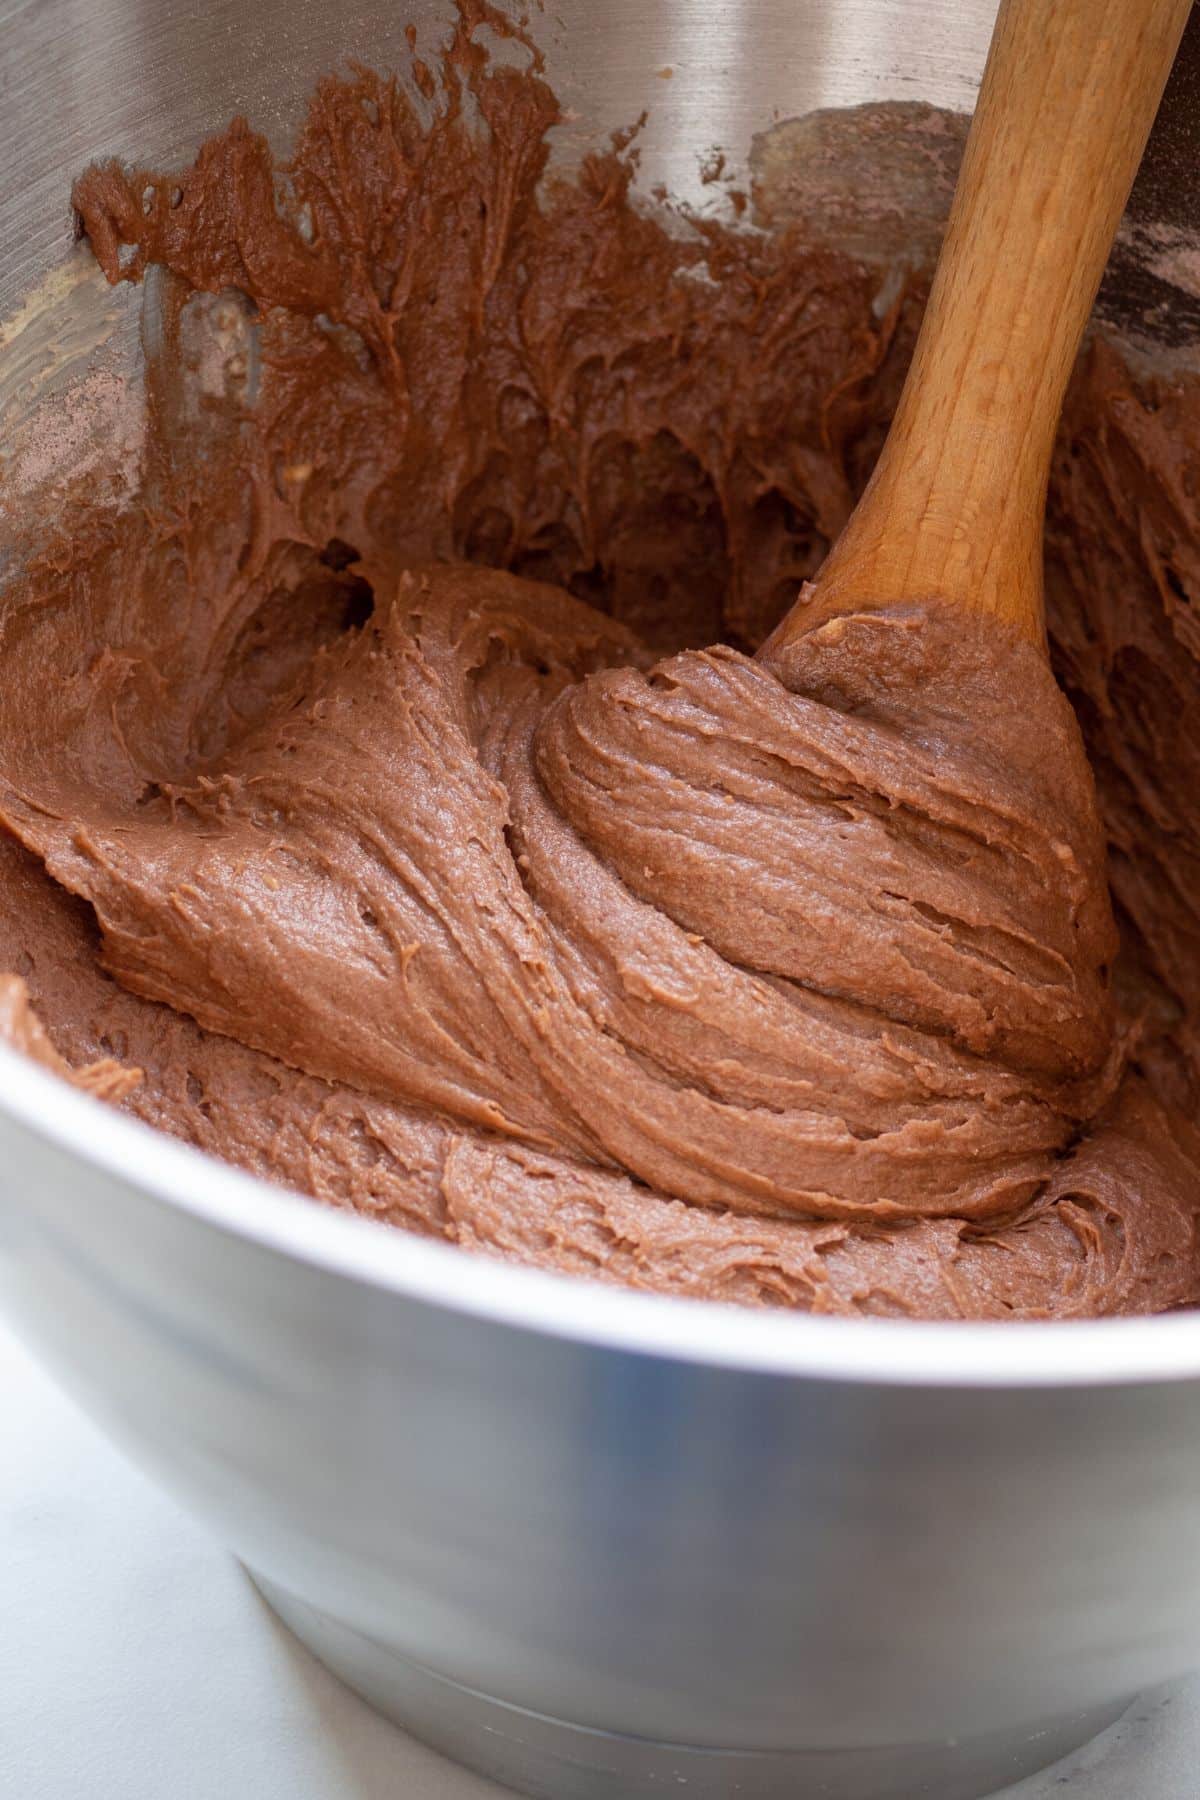 A wooden spoon in a metal bowl of chocolate cake batter.